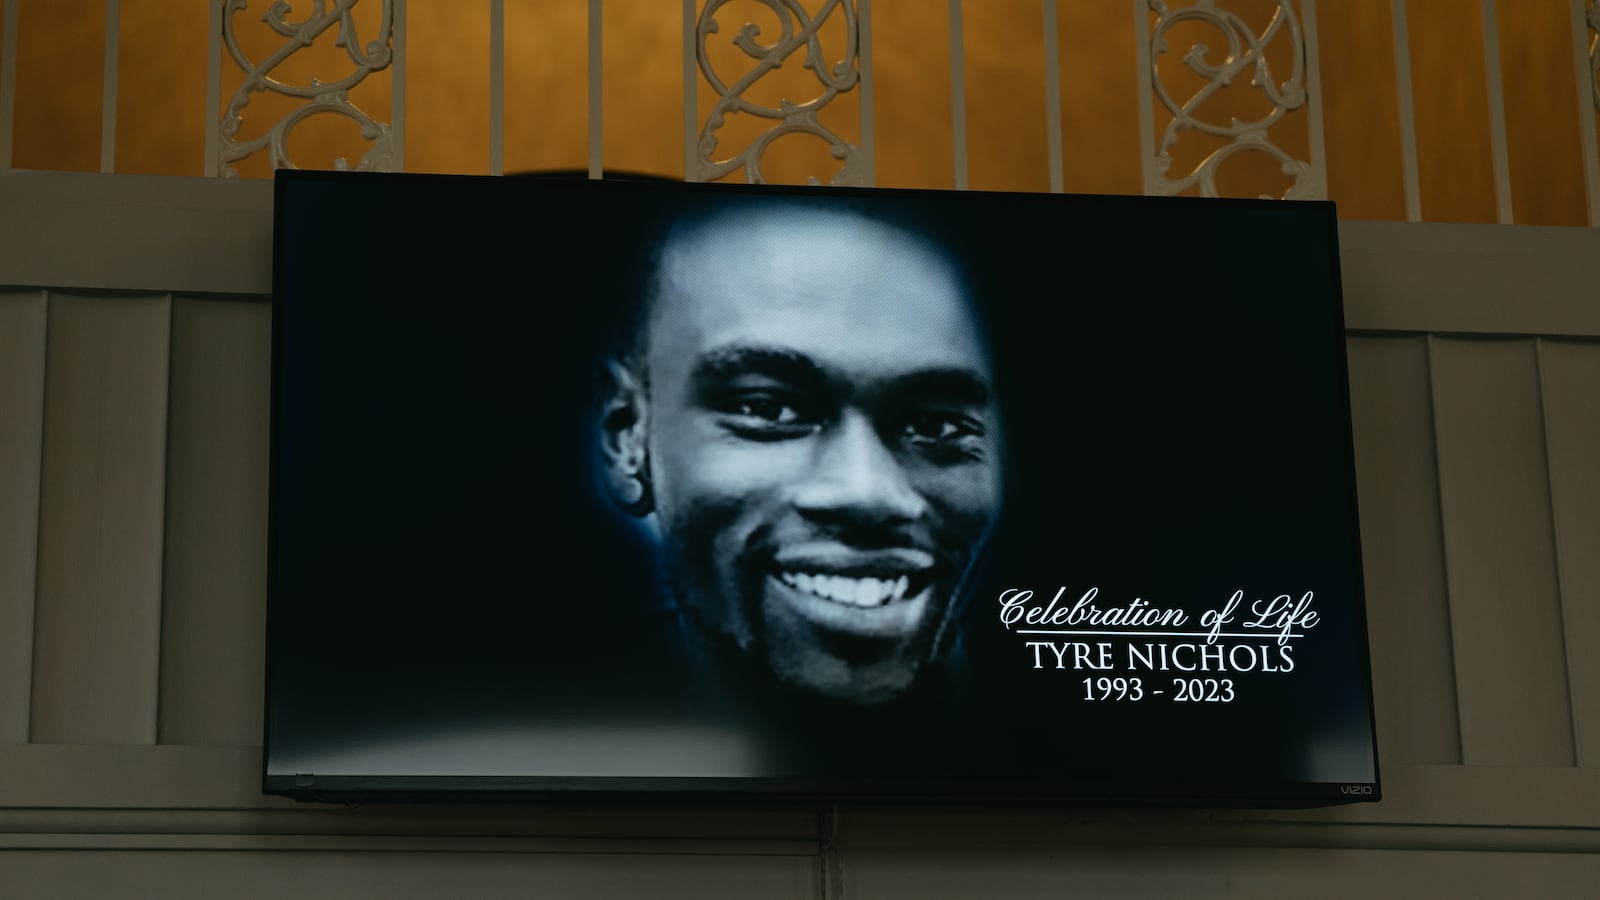 A screen at the entrance of Mississippi Boulevard Christian Church displays the celebration of life for Tyre Nichols.